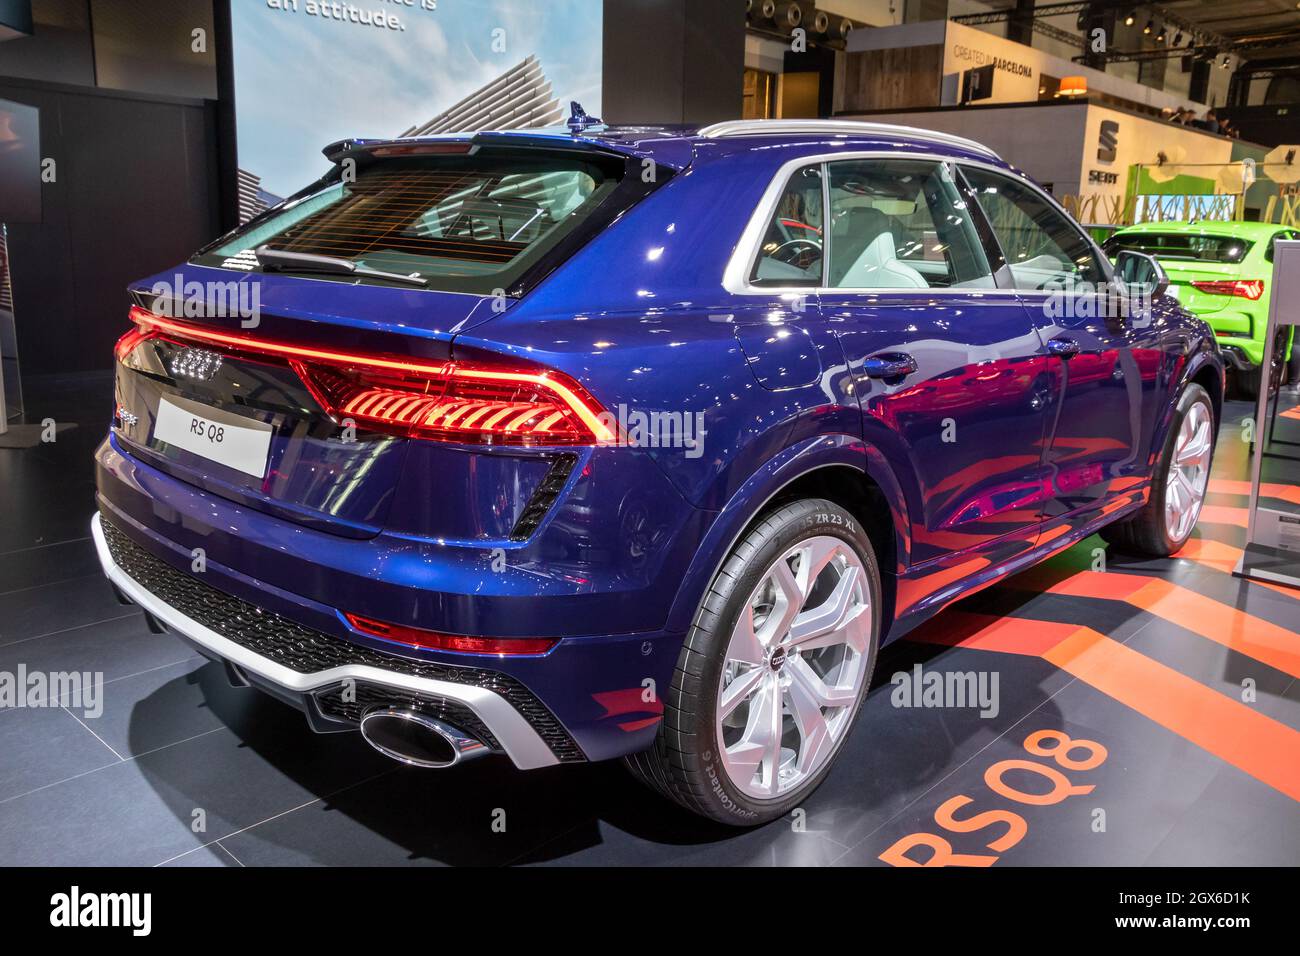 Audi RS Q8 car showcased at the Autosalon 2020 Motor Show. Brussels, Belgium - January 9, 2020. Stock Photo